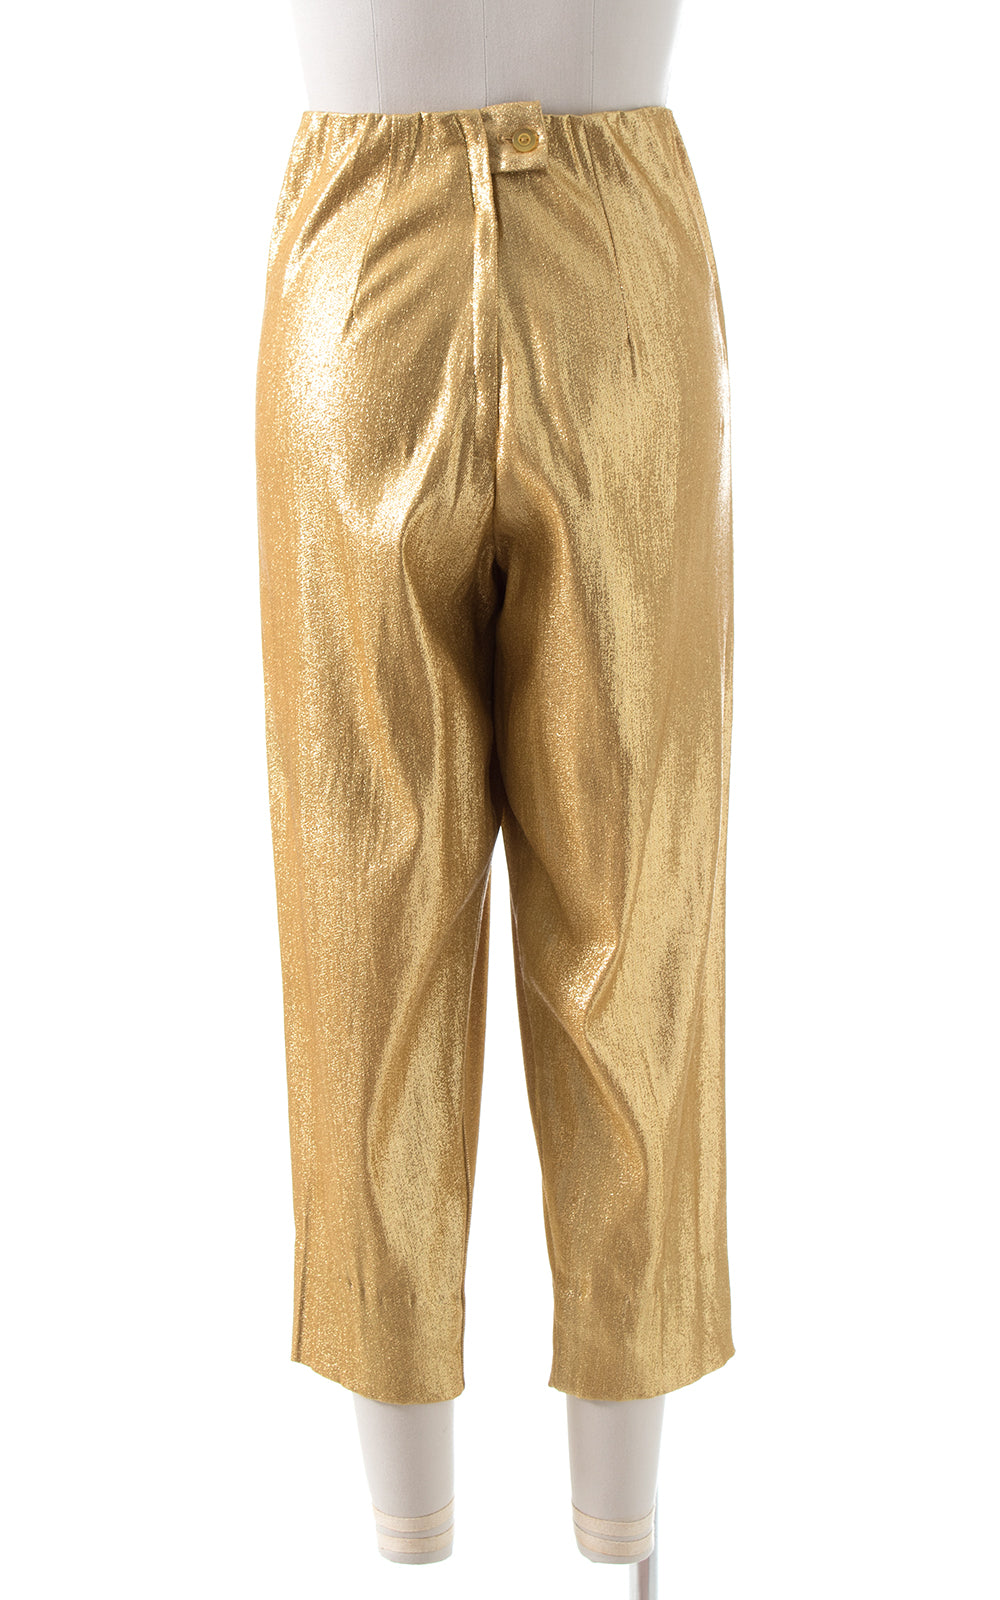 BLACK LADY Slim Fit Women Gold Trousers - Buy BLACK LADY Slim Fit Women Gold  Trousers Online at Best Prices in India | Flipkart.com